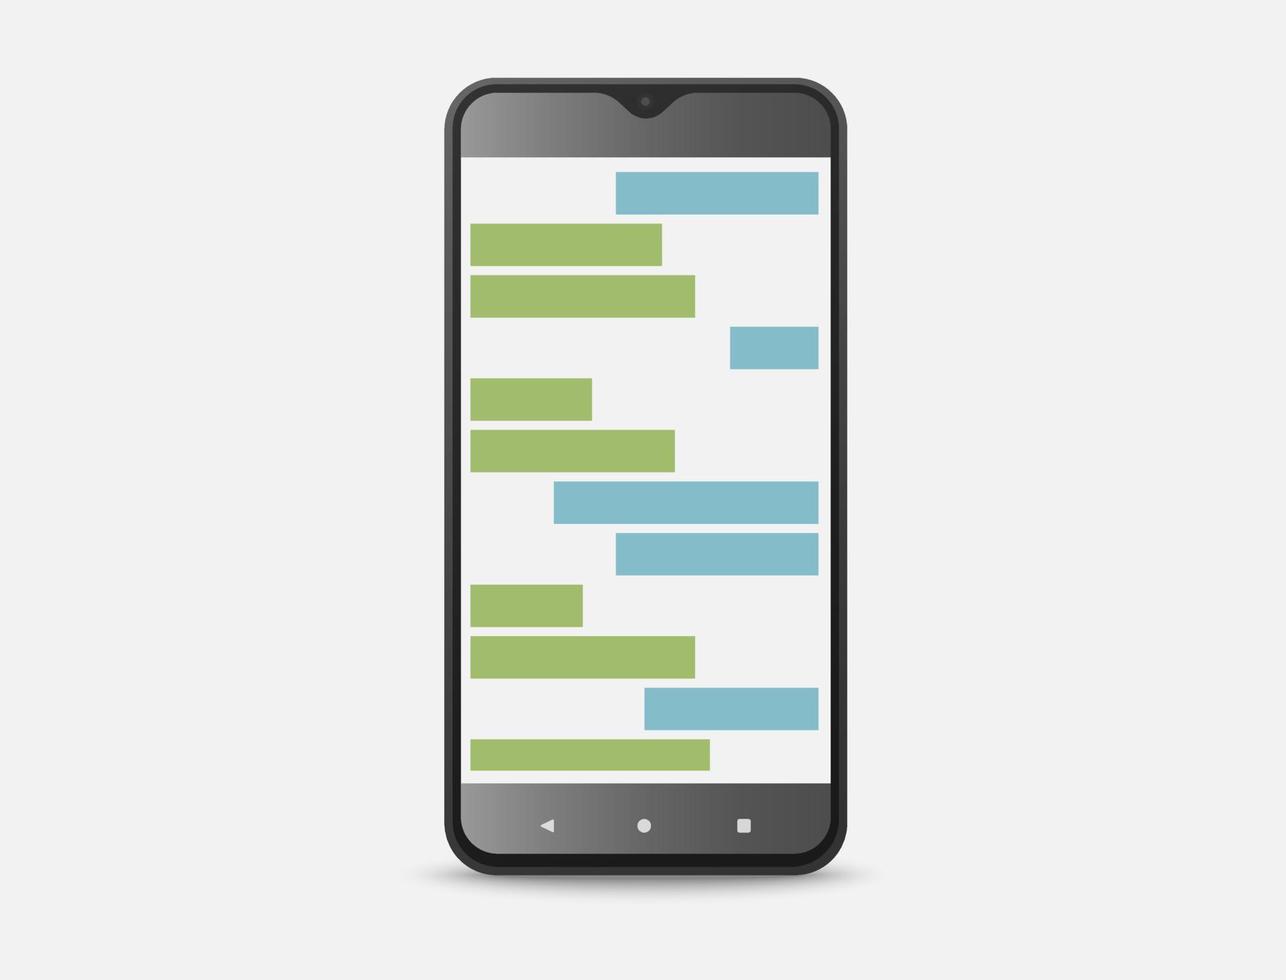 Smartphone and conversation illustration displayed on screen vector